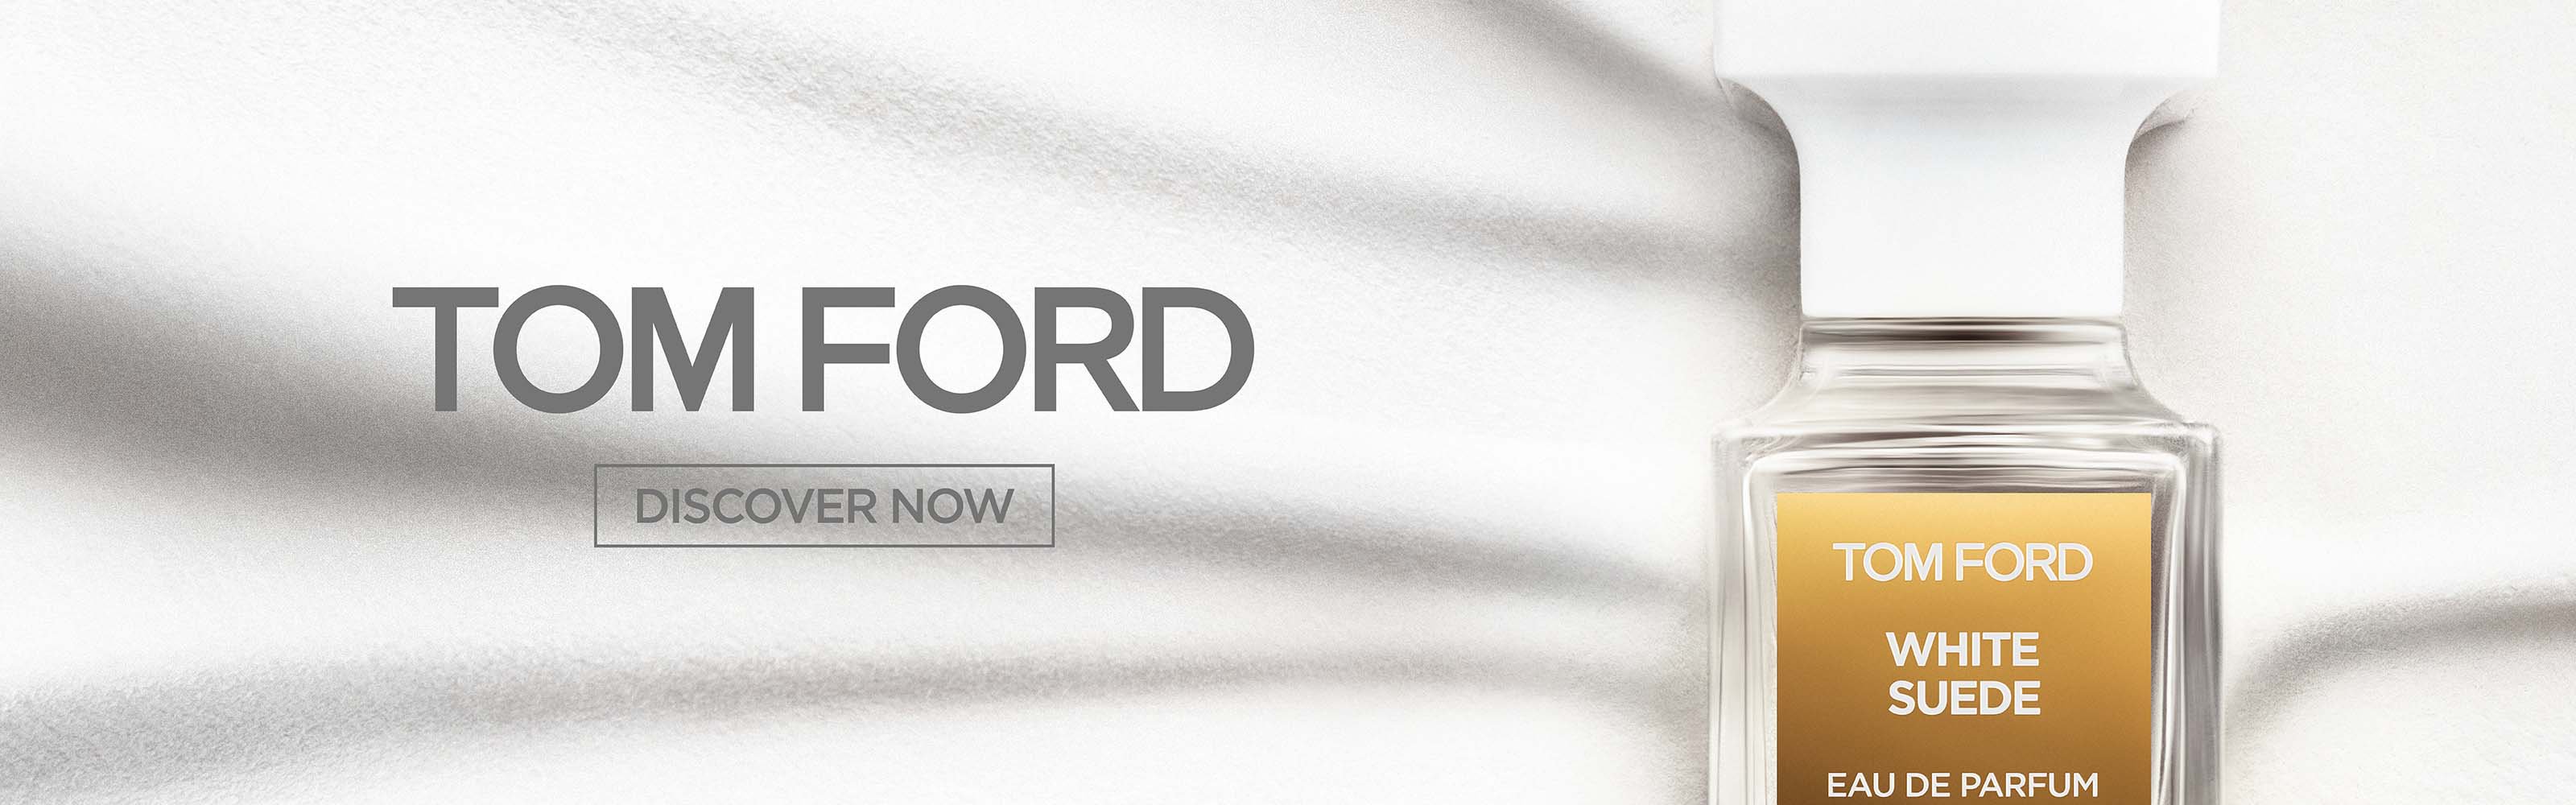 Tom Ford Official Brand Store | KRISSHOP - SINGAPORE AIRLINES